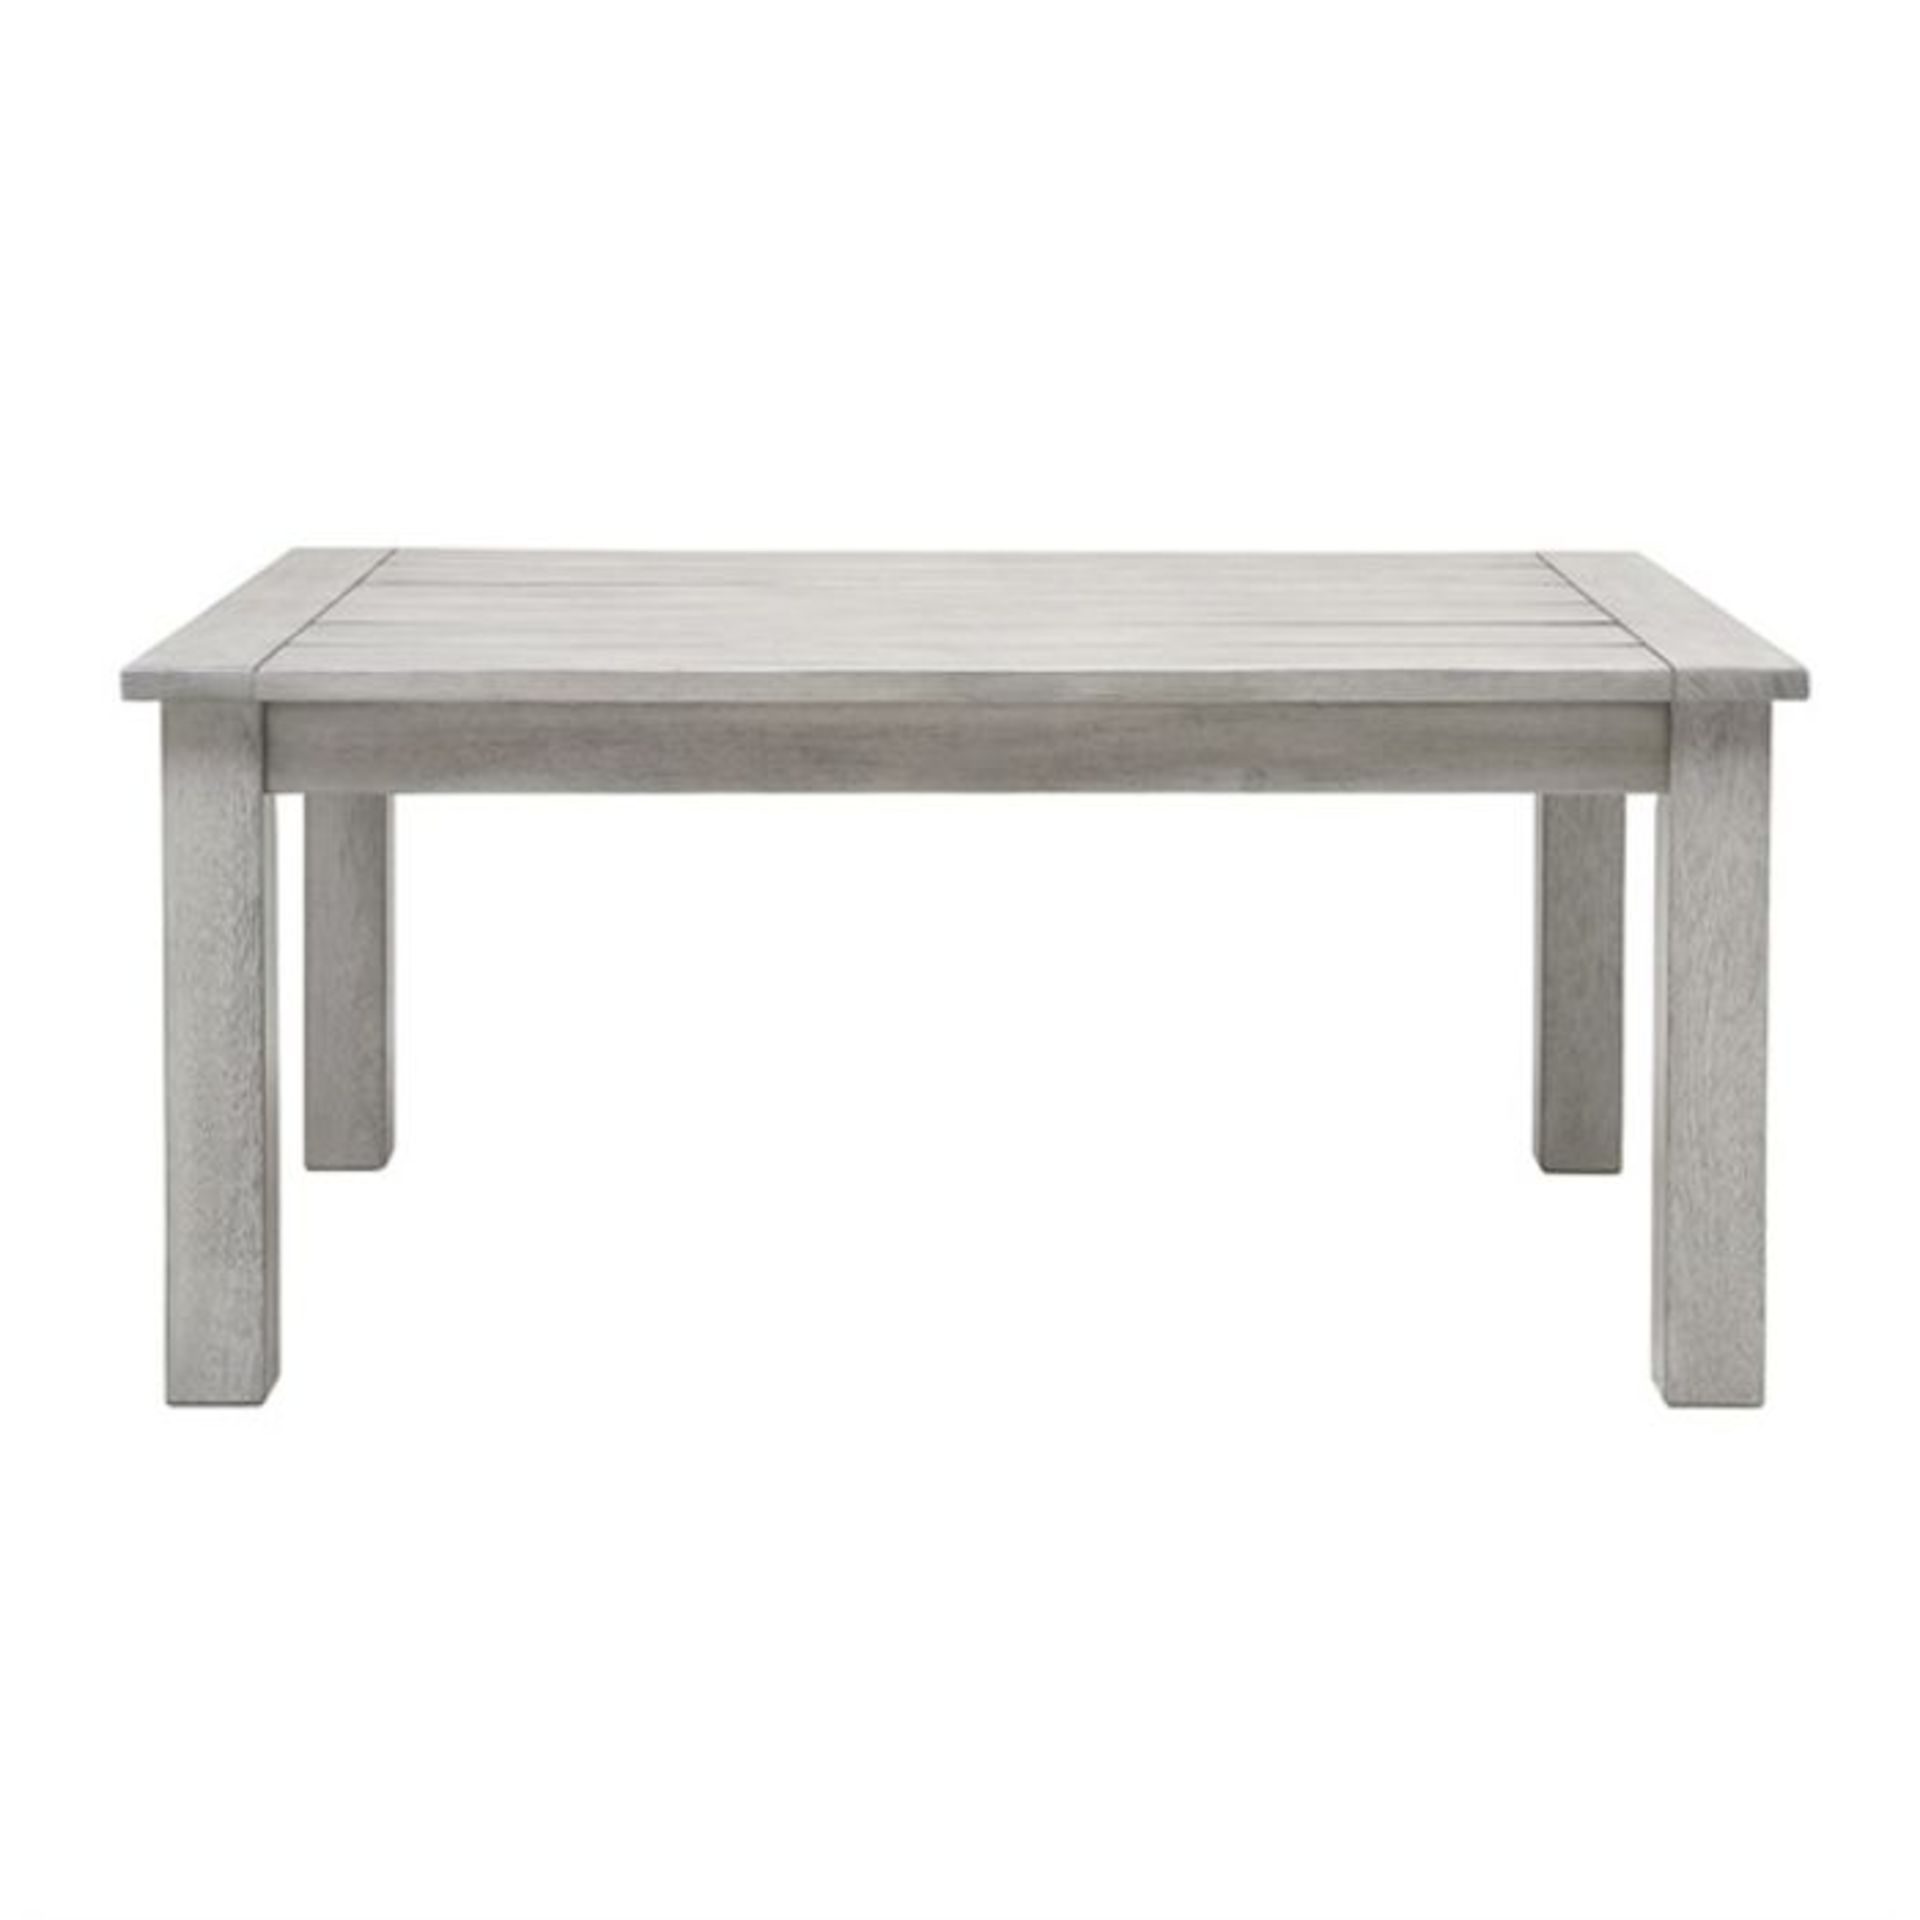 Cotswold Company Baunton Coffee table RRP ?395.00 Made from acacia wood with a classic slatted